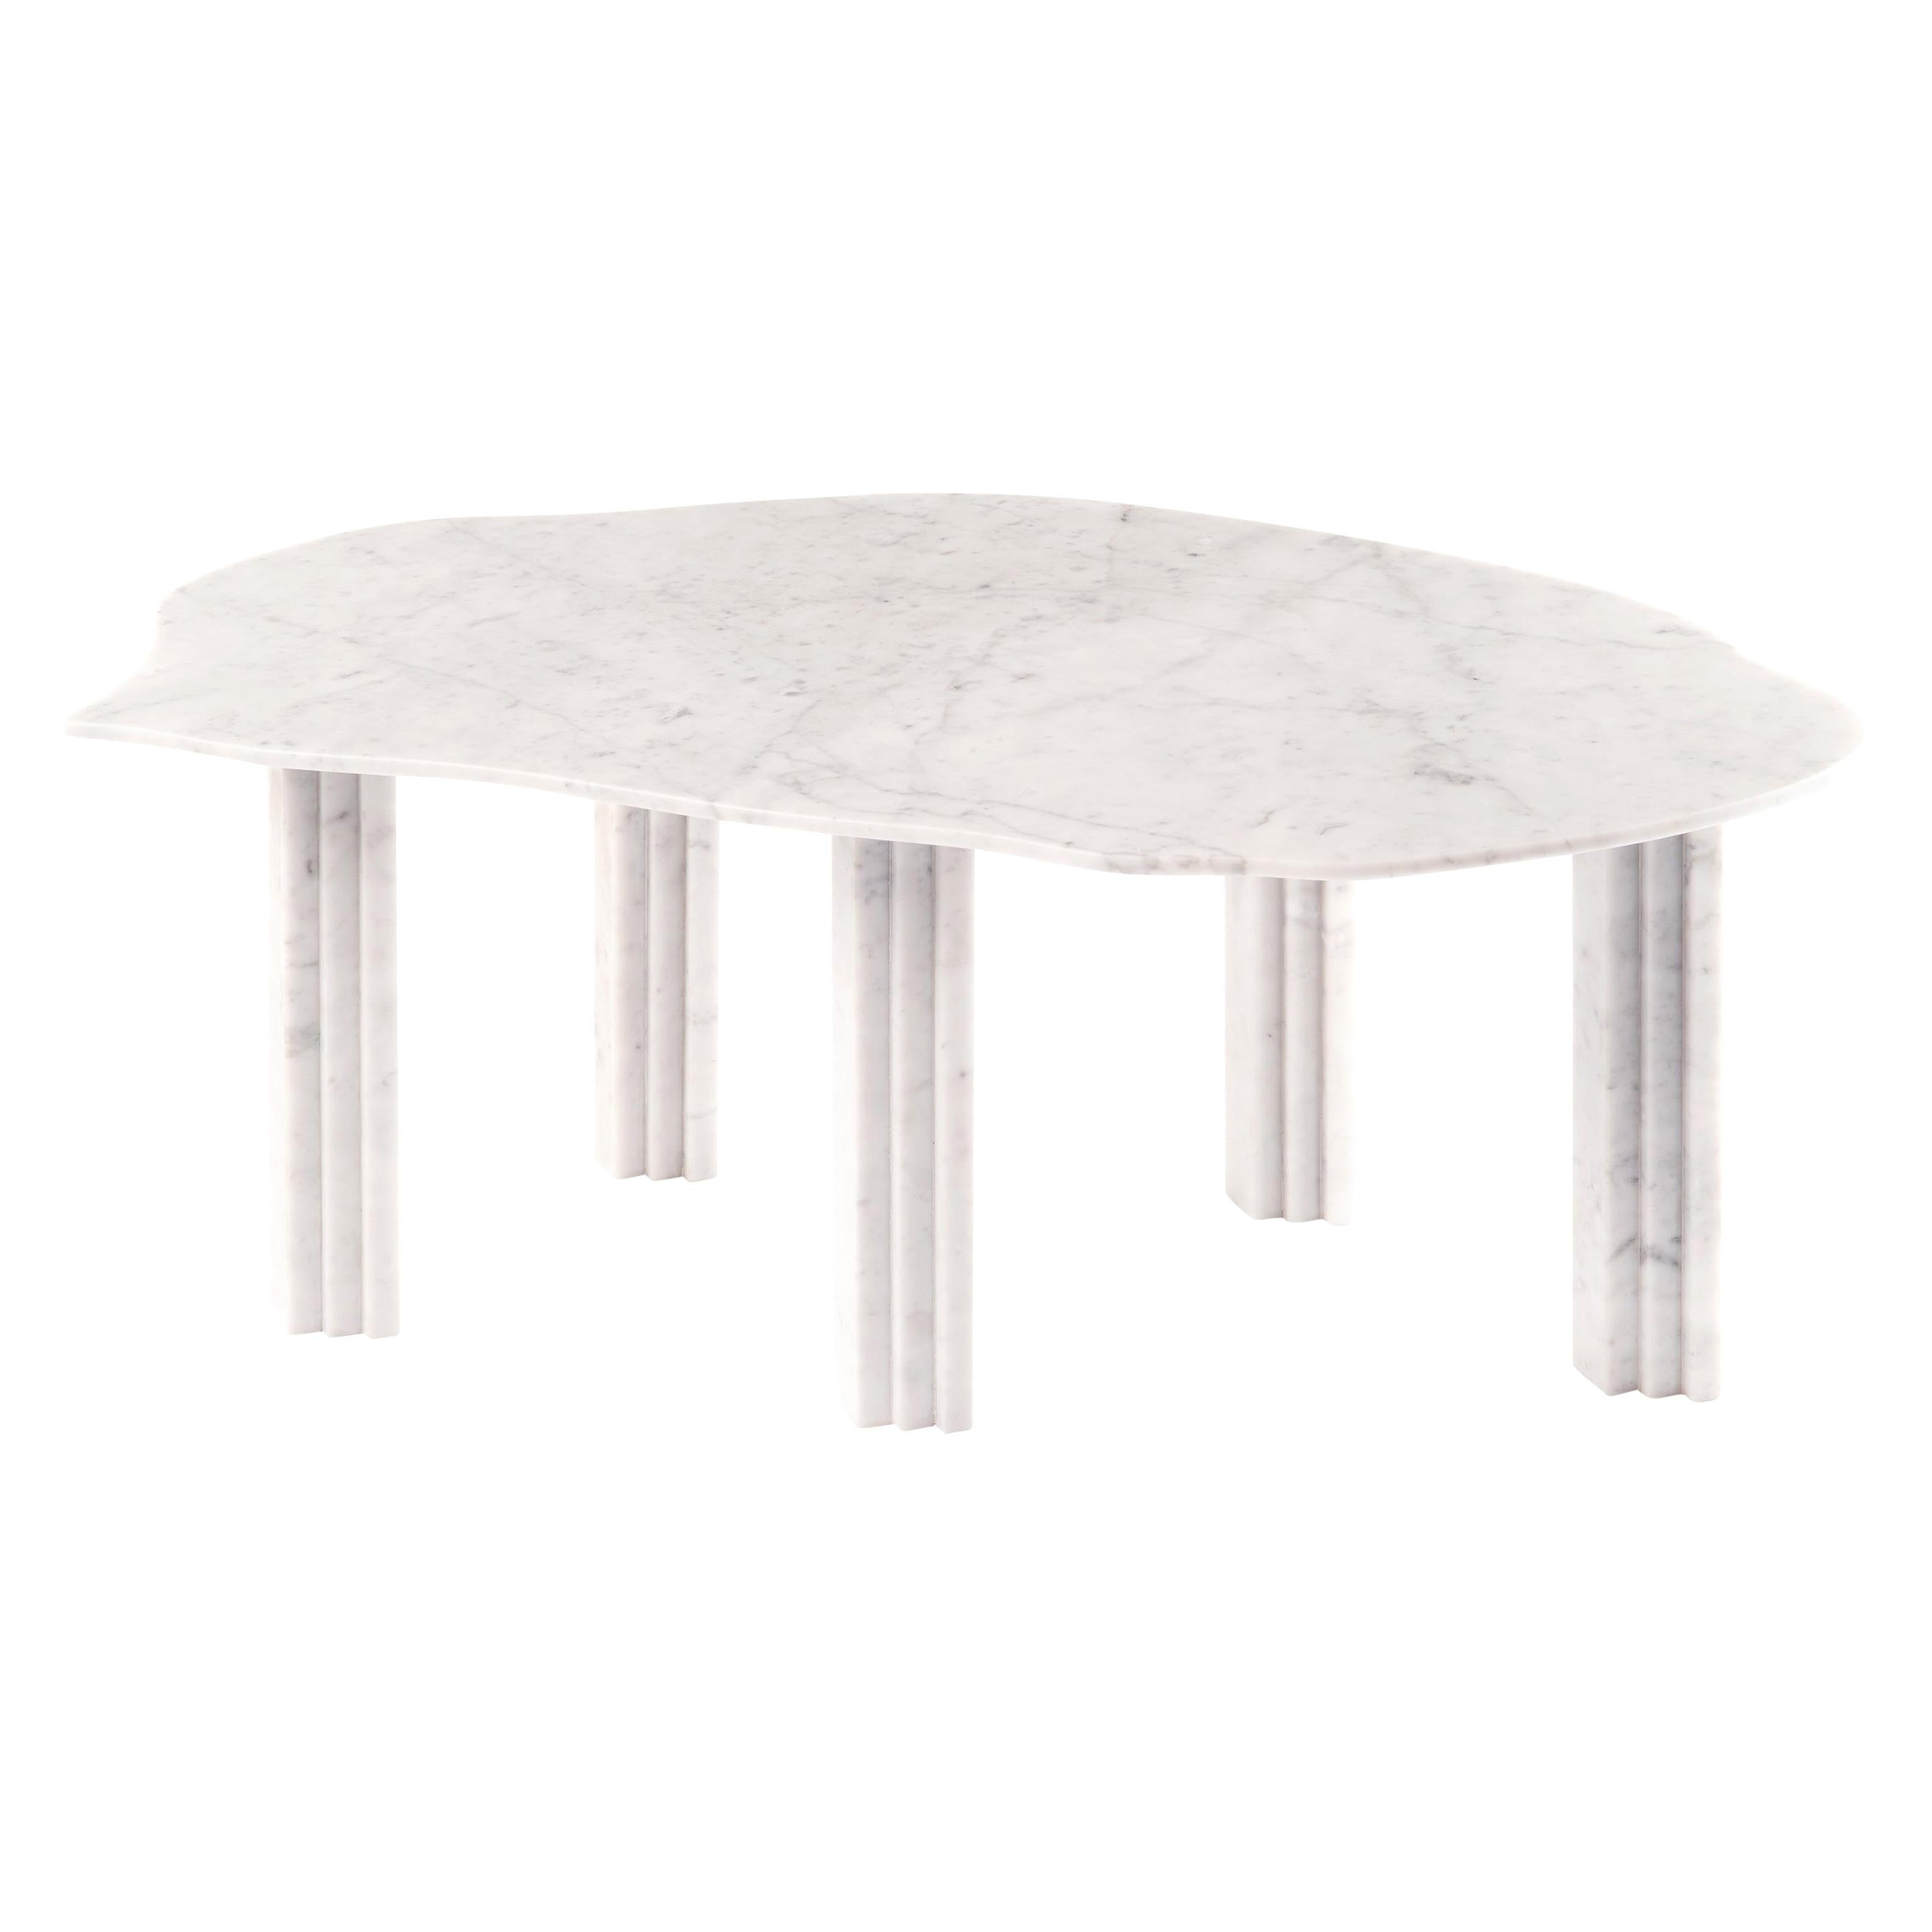 Sculptural white marble coffee table, Lorenzo Bini
Title: Cyclamen
Measures: 95 x 63 x H 37 cm
Materials: Bianco Carrara

Also available as a dining table 190 x 115 x H 73.5 cm
Six tableaux is a series of marble tables designed by Lorenzo Bini